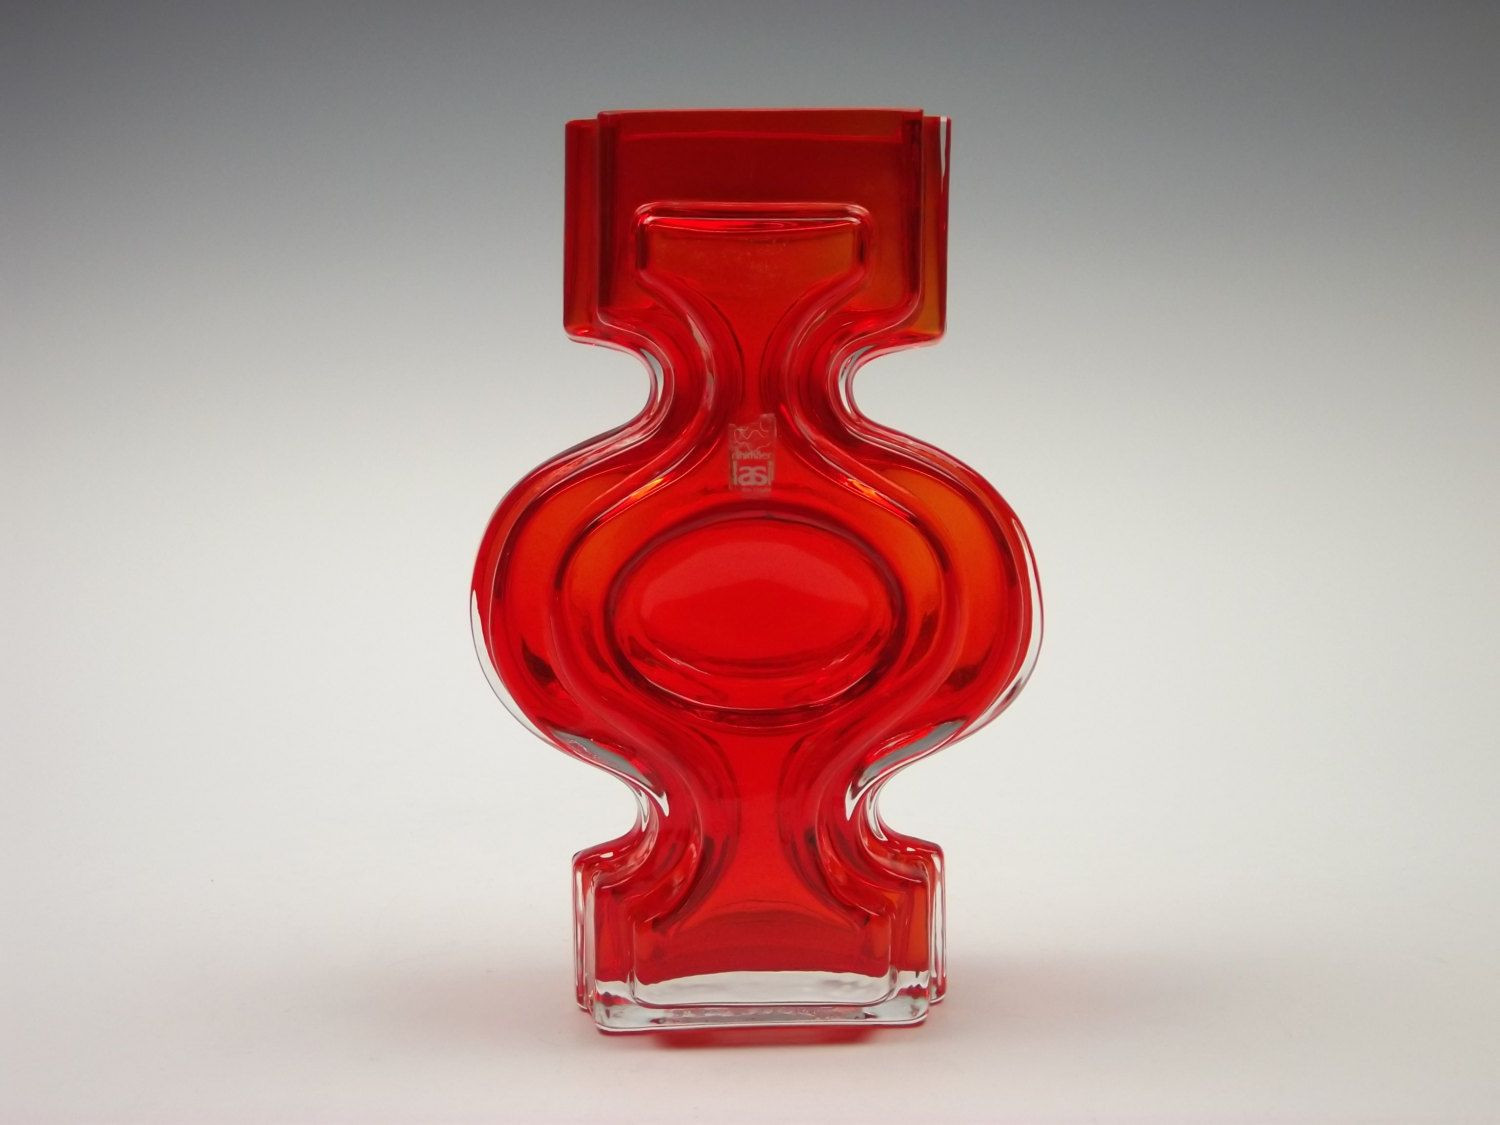 24 Cute Ruby Red Vase 2024 free download ruby red vase of riihimaki kaappikello pirtti olive green glass vase by hel throughout riihimaki emma red glass vase by helena tynell